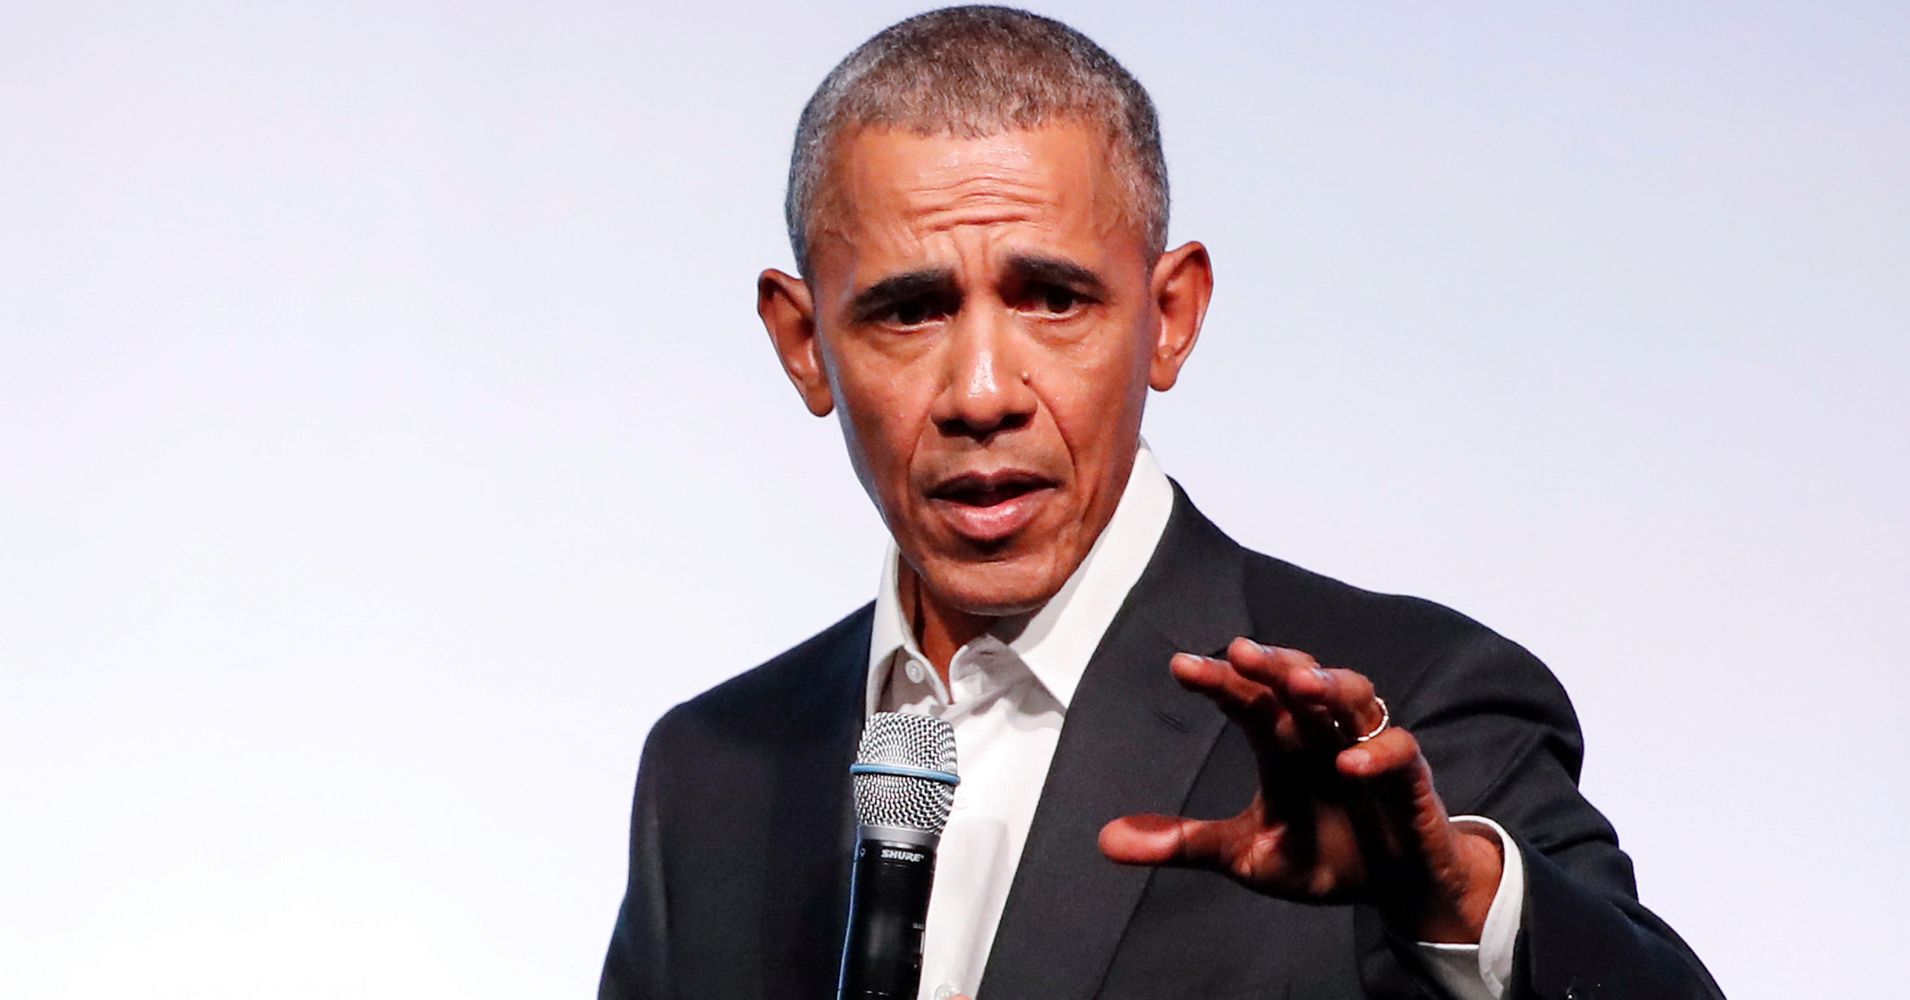 Barack Obama Just Trolled Donald Trump And The Rest Of The Birthers ...